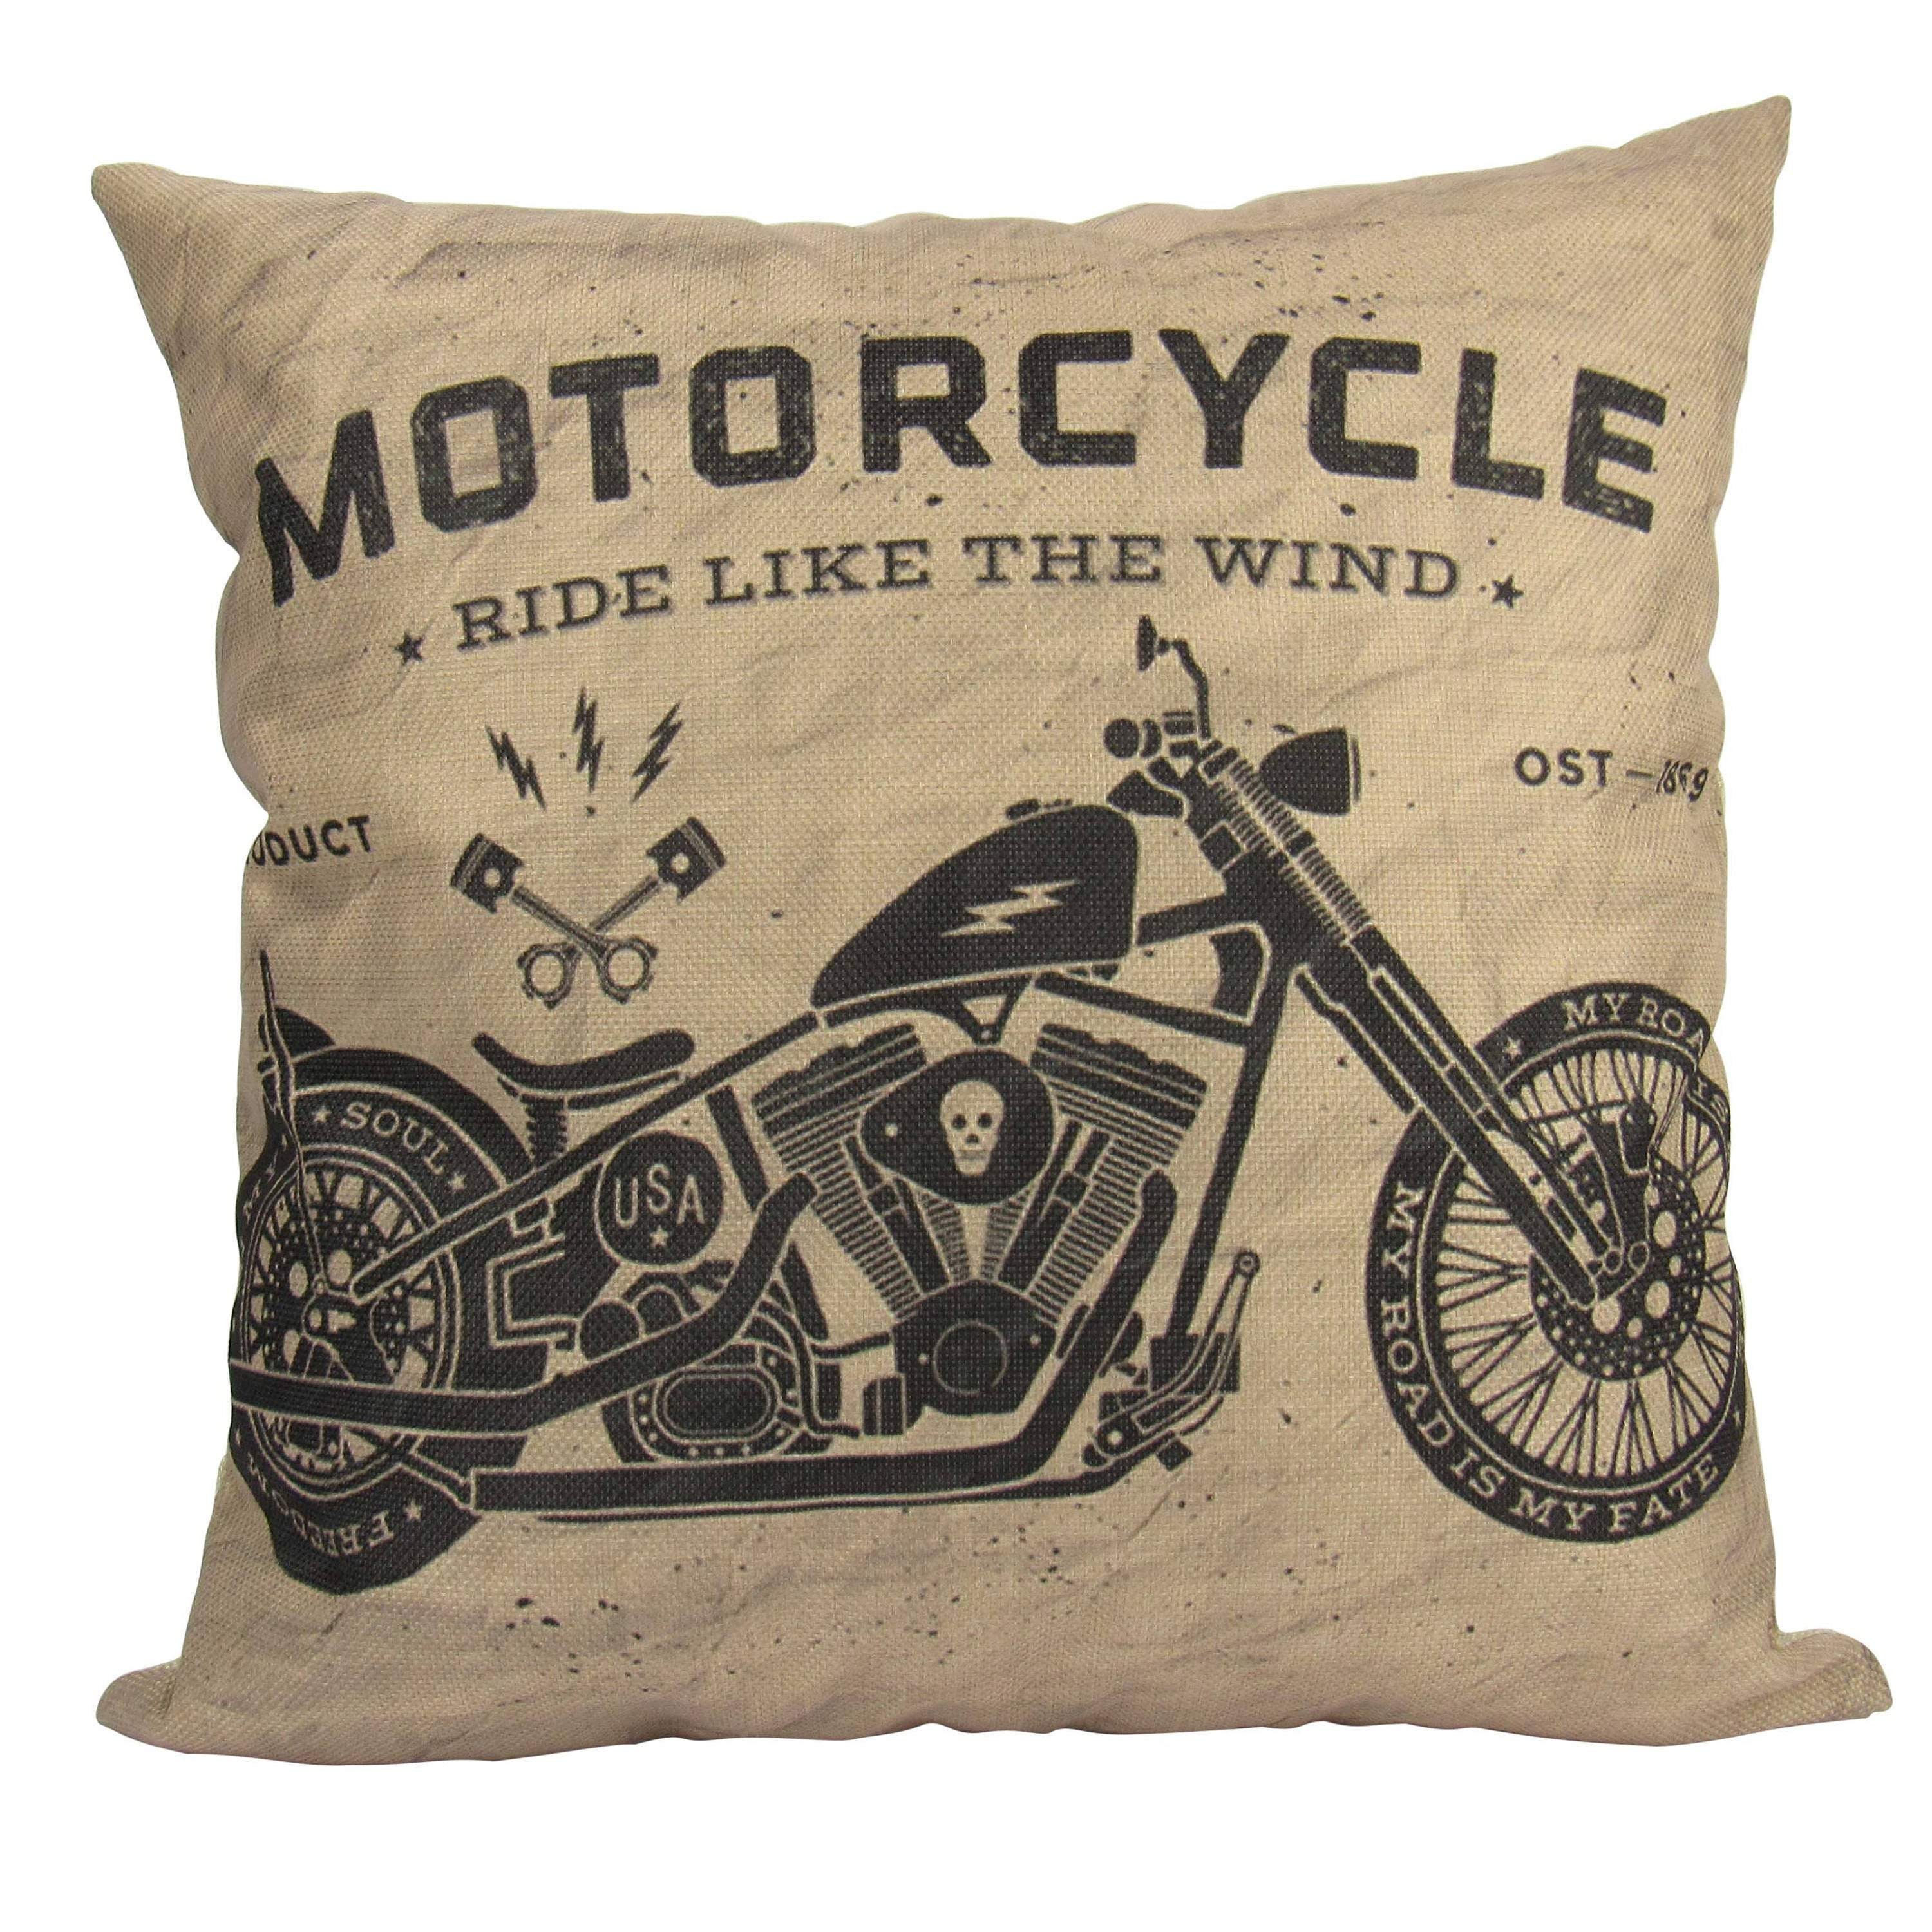 American Motorcycle Crotch Rocket Gear Shifting' Throw Pillow Cover 18” x  18”